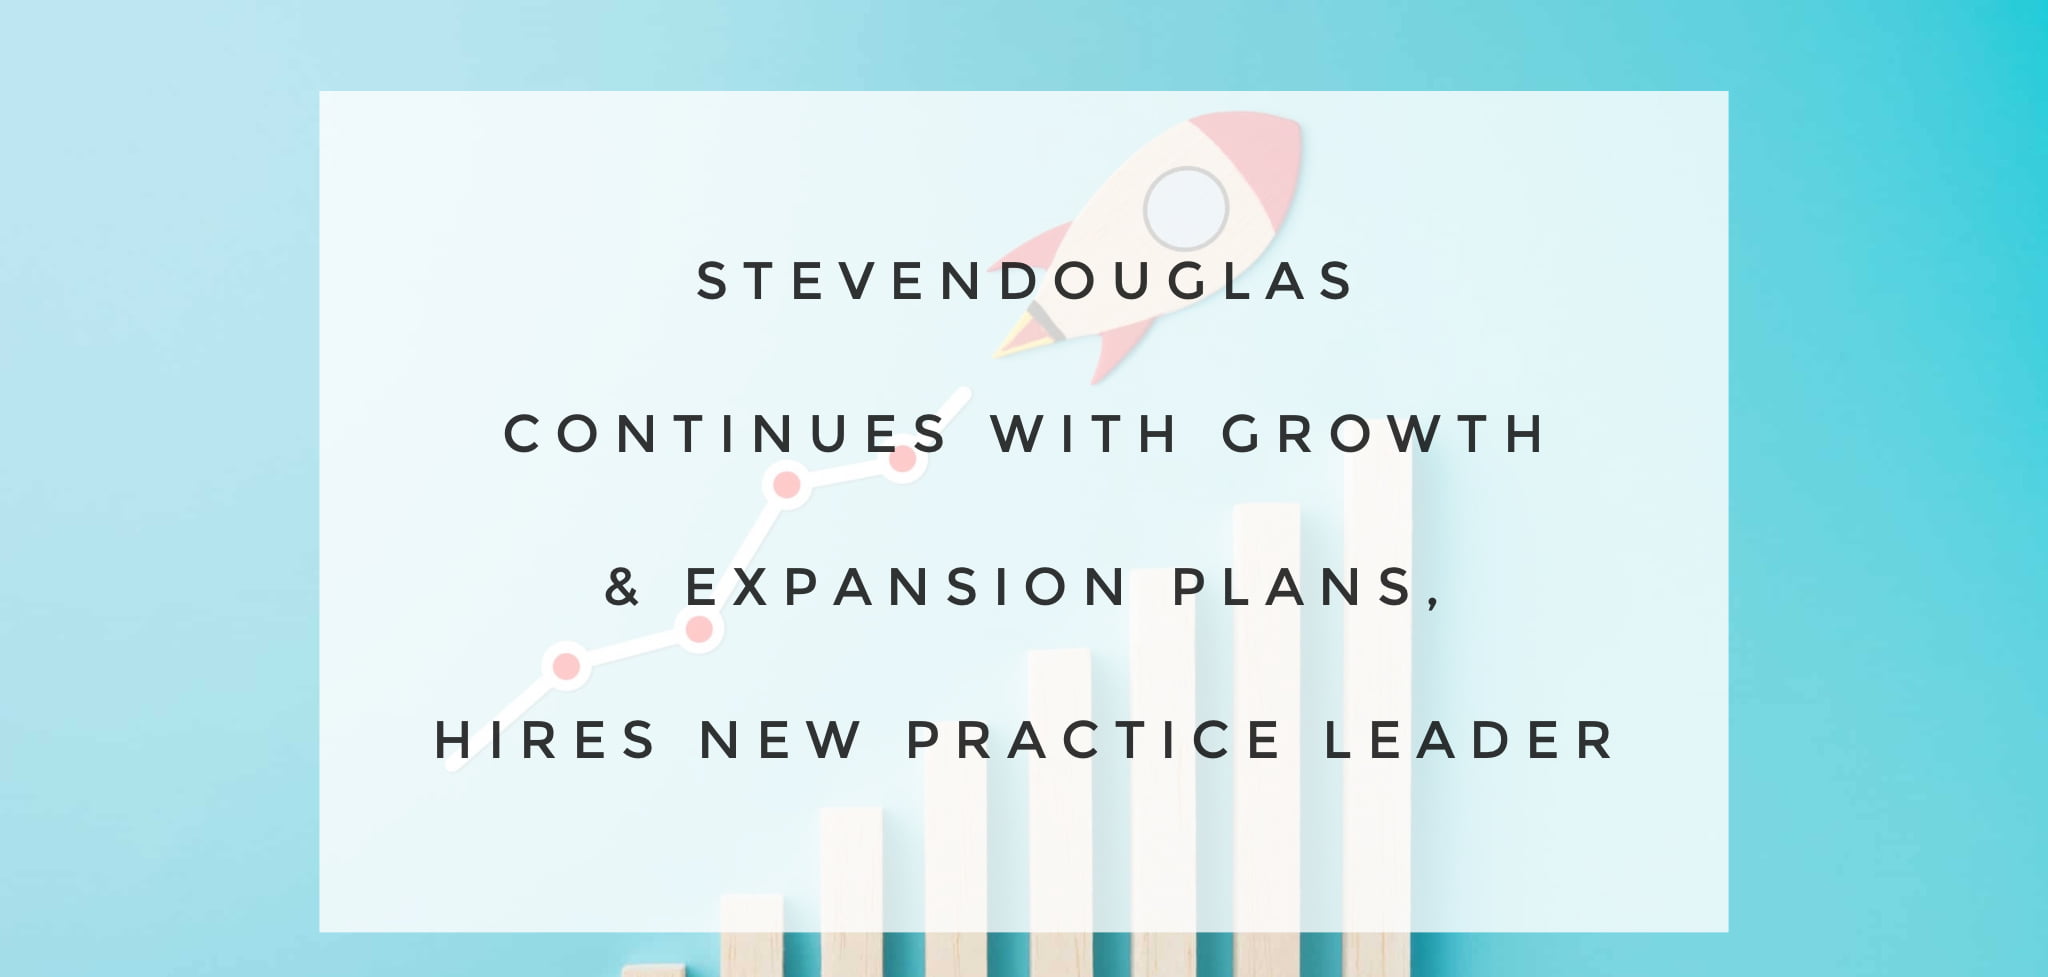 StevenDouglas Continues with Growth & Expansion Plans, Hires New Practice Leader